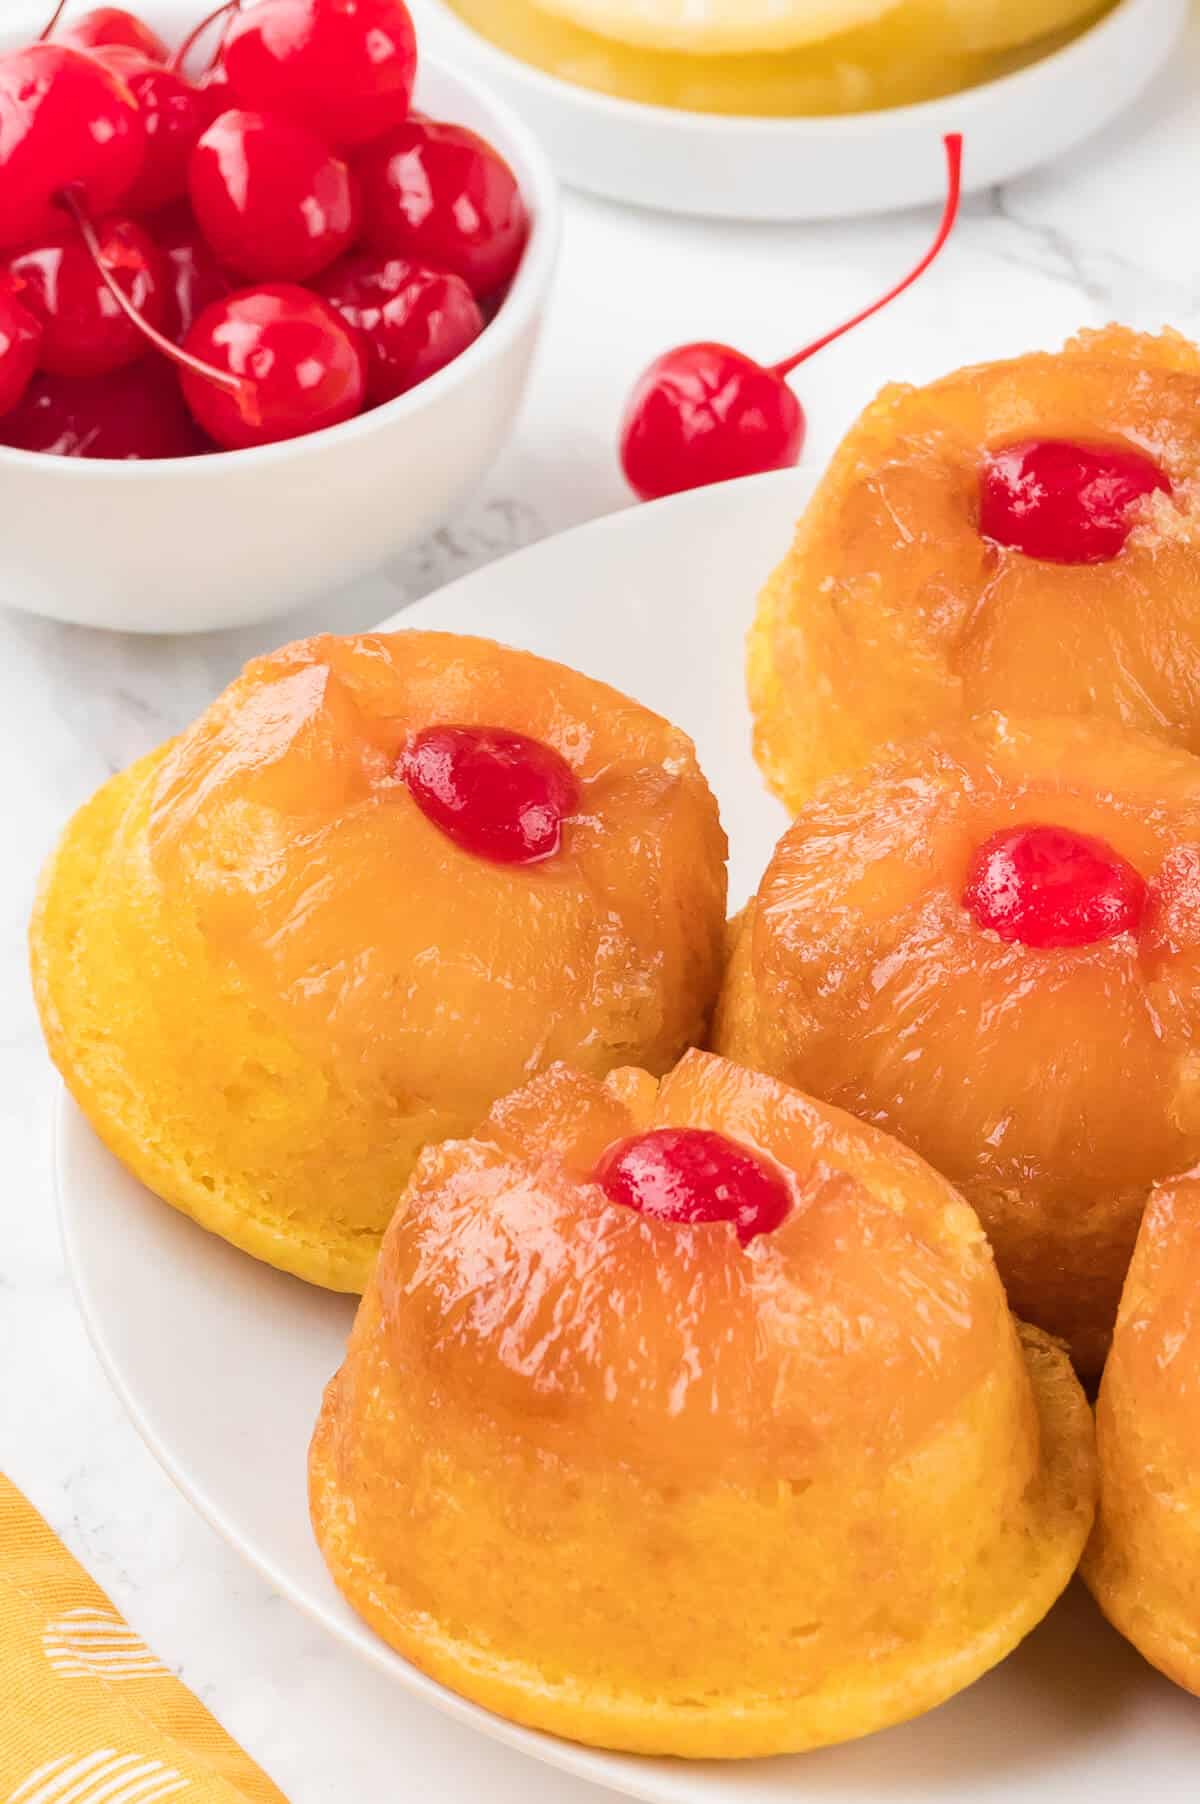 Pineapple Upside Down Cupcakes on a plate.